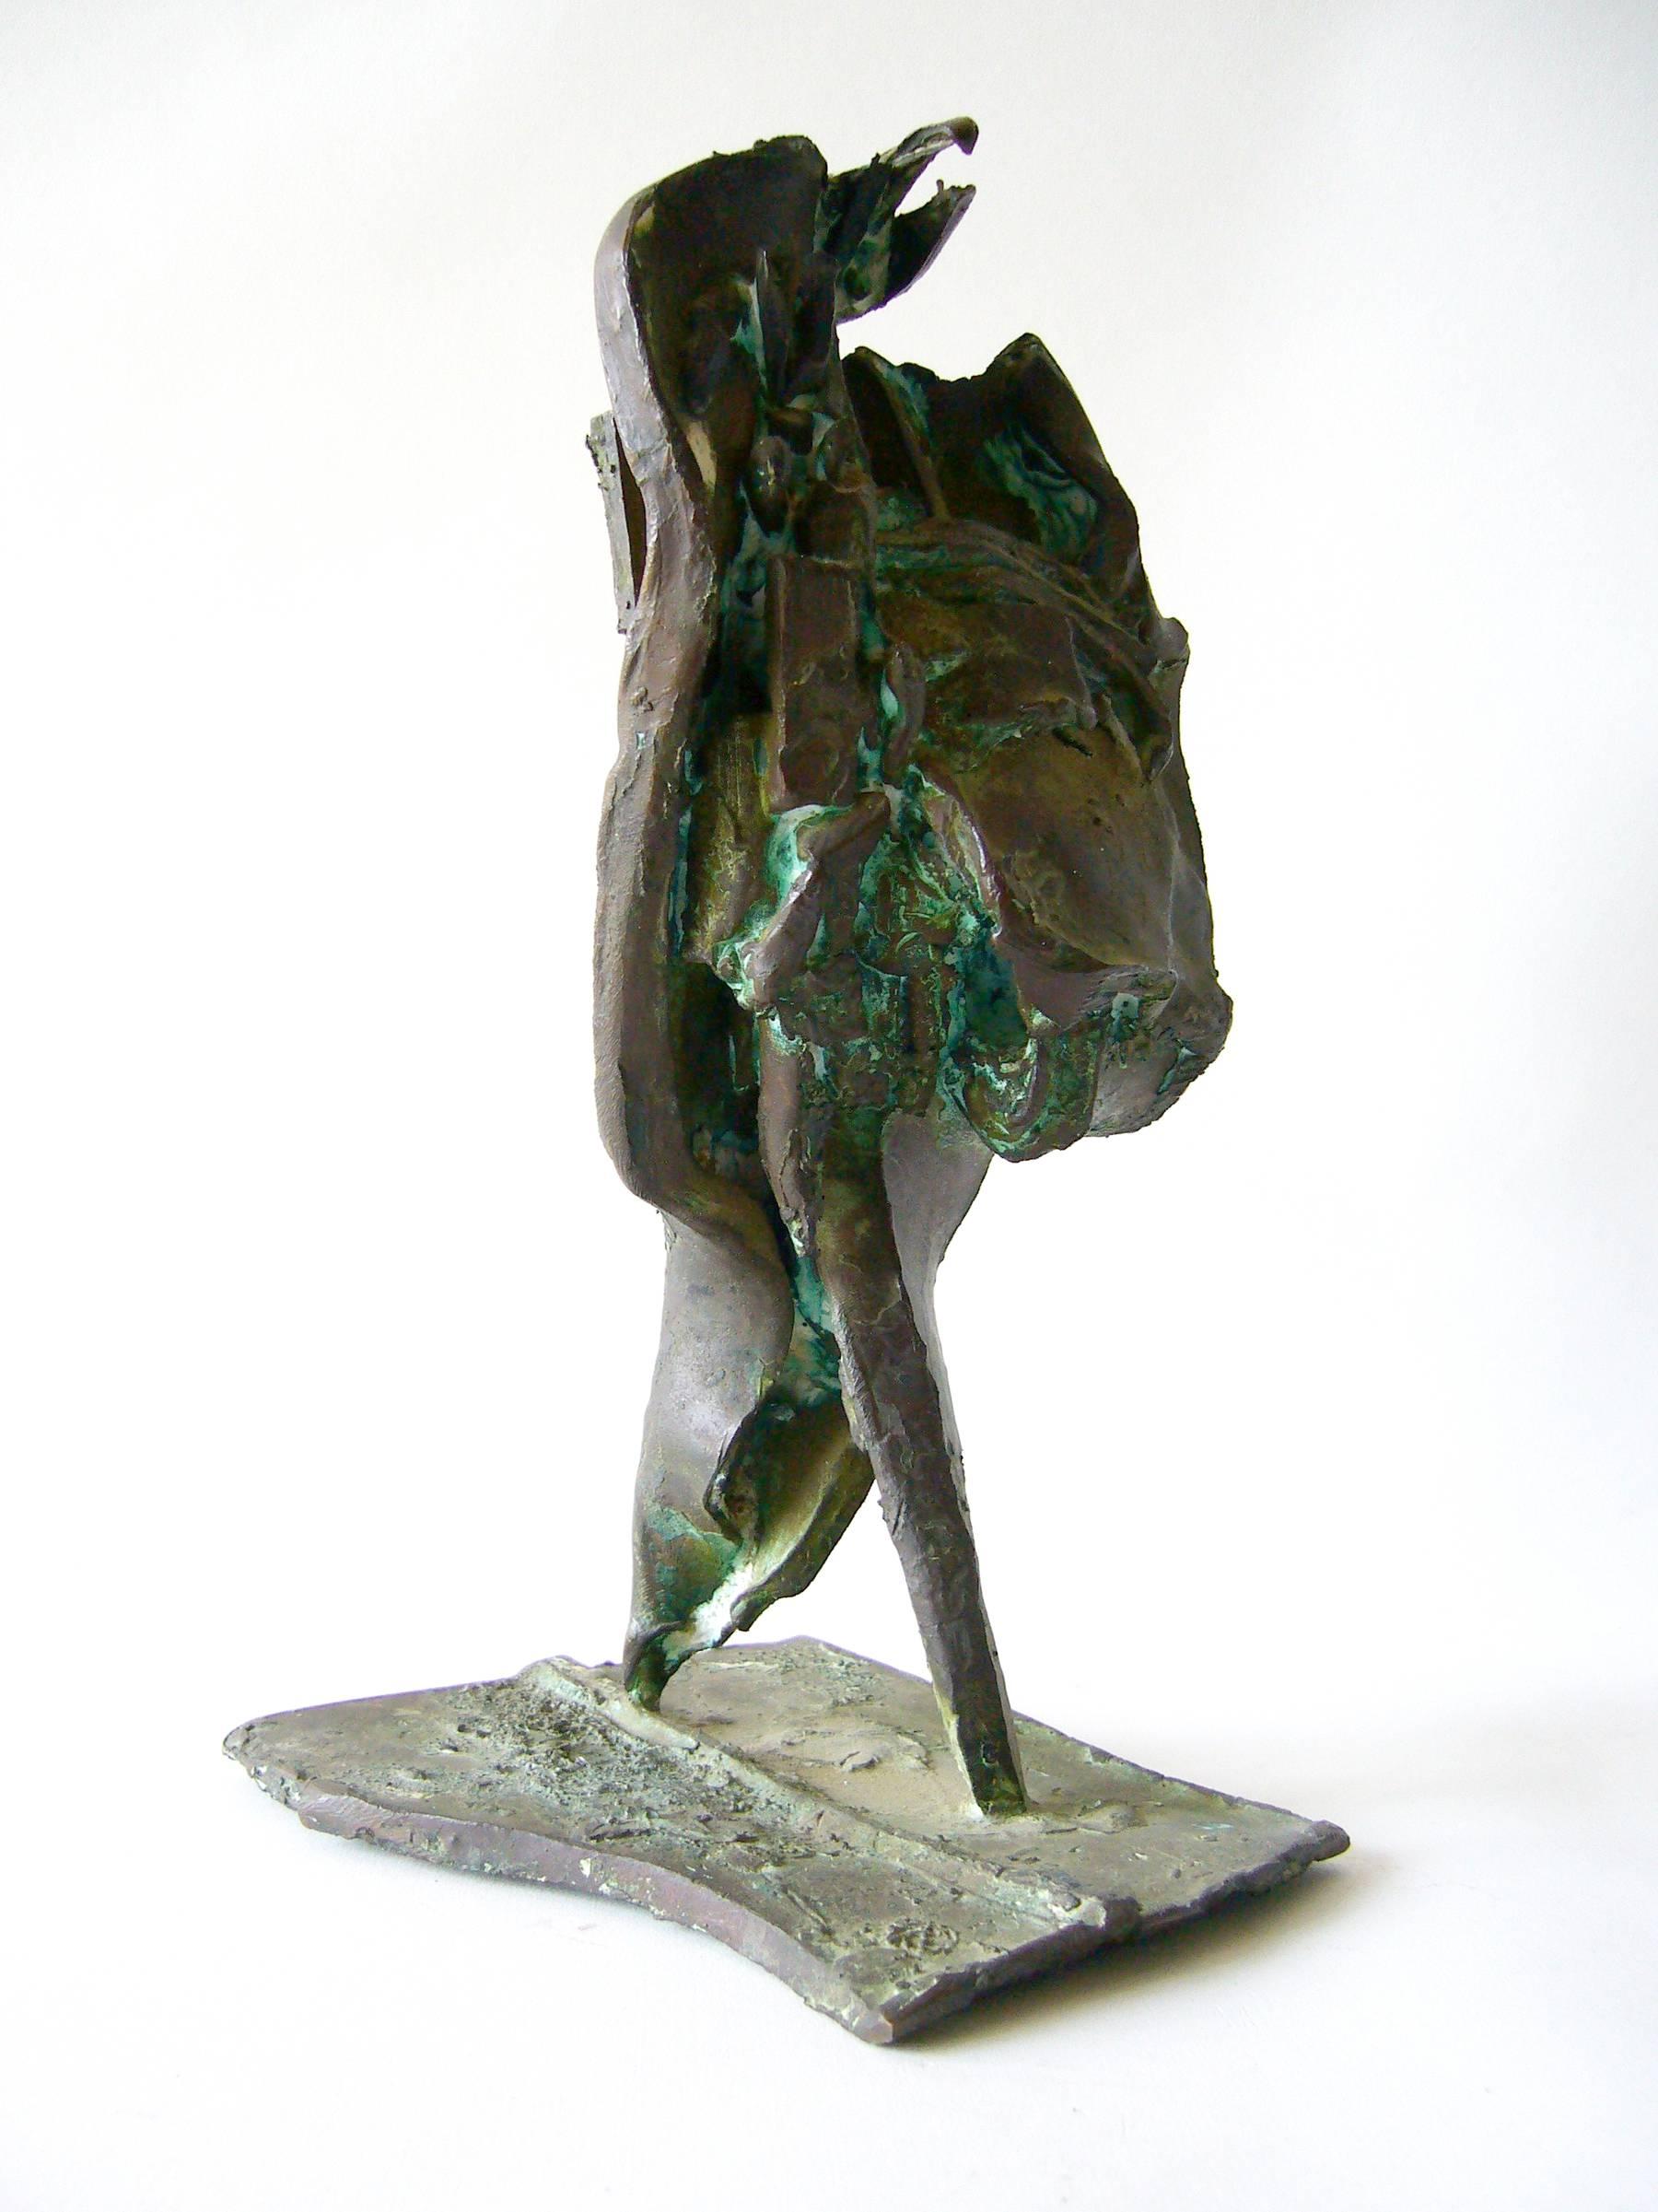 Bronze abstract figural sculpture created by sculptor and jeweler Robert A. Dhaemers of Oakland, California. 
Dhaemers exhibited at the National Gallery of Canada in Ottowa, the Oakland Museum of California, the Elaine Benson Gallery in